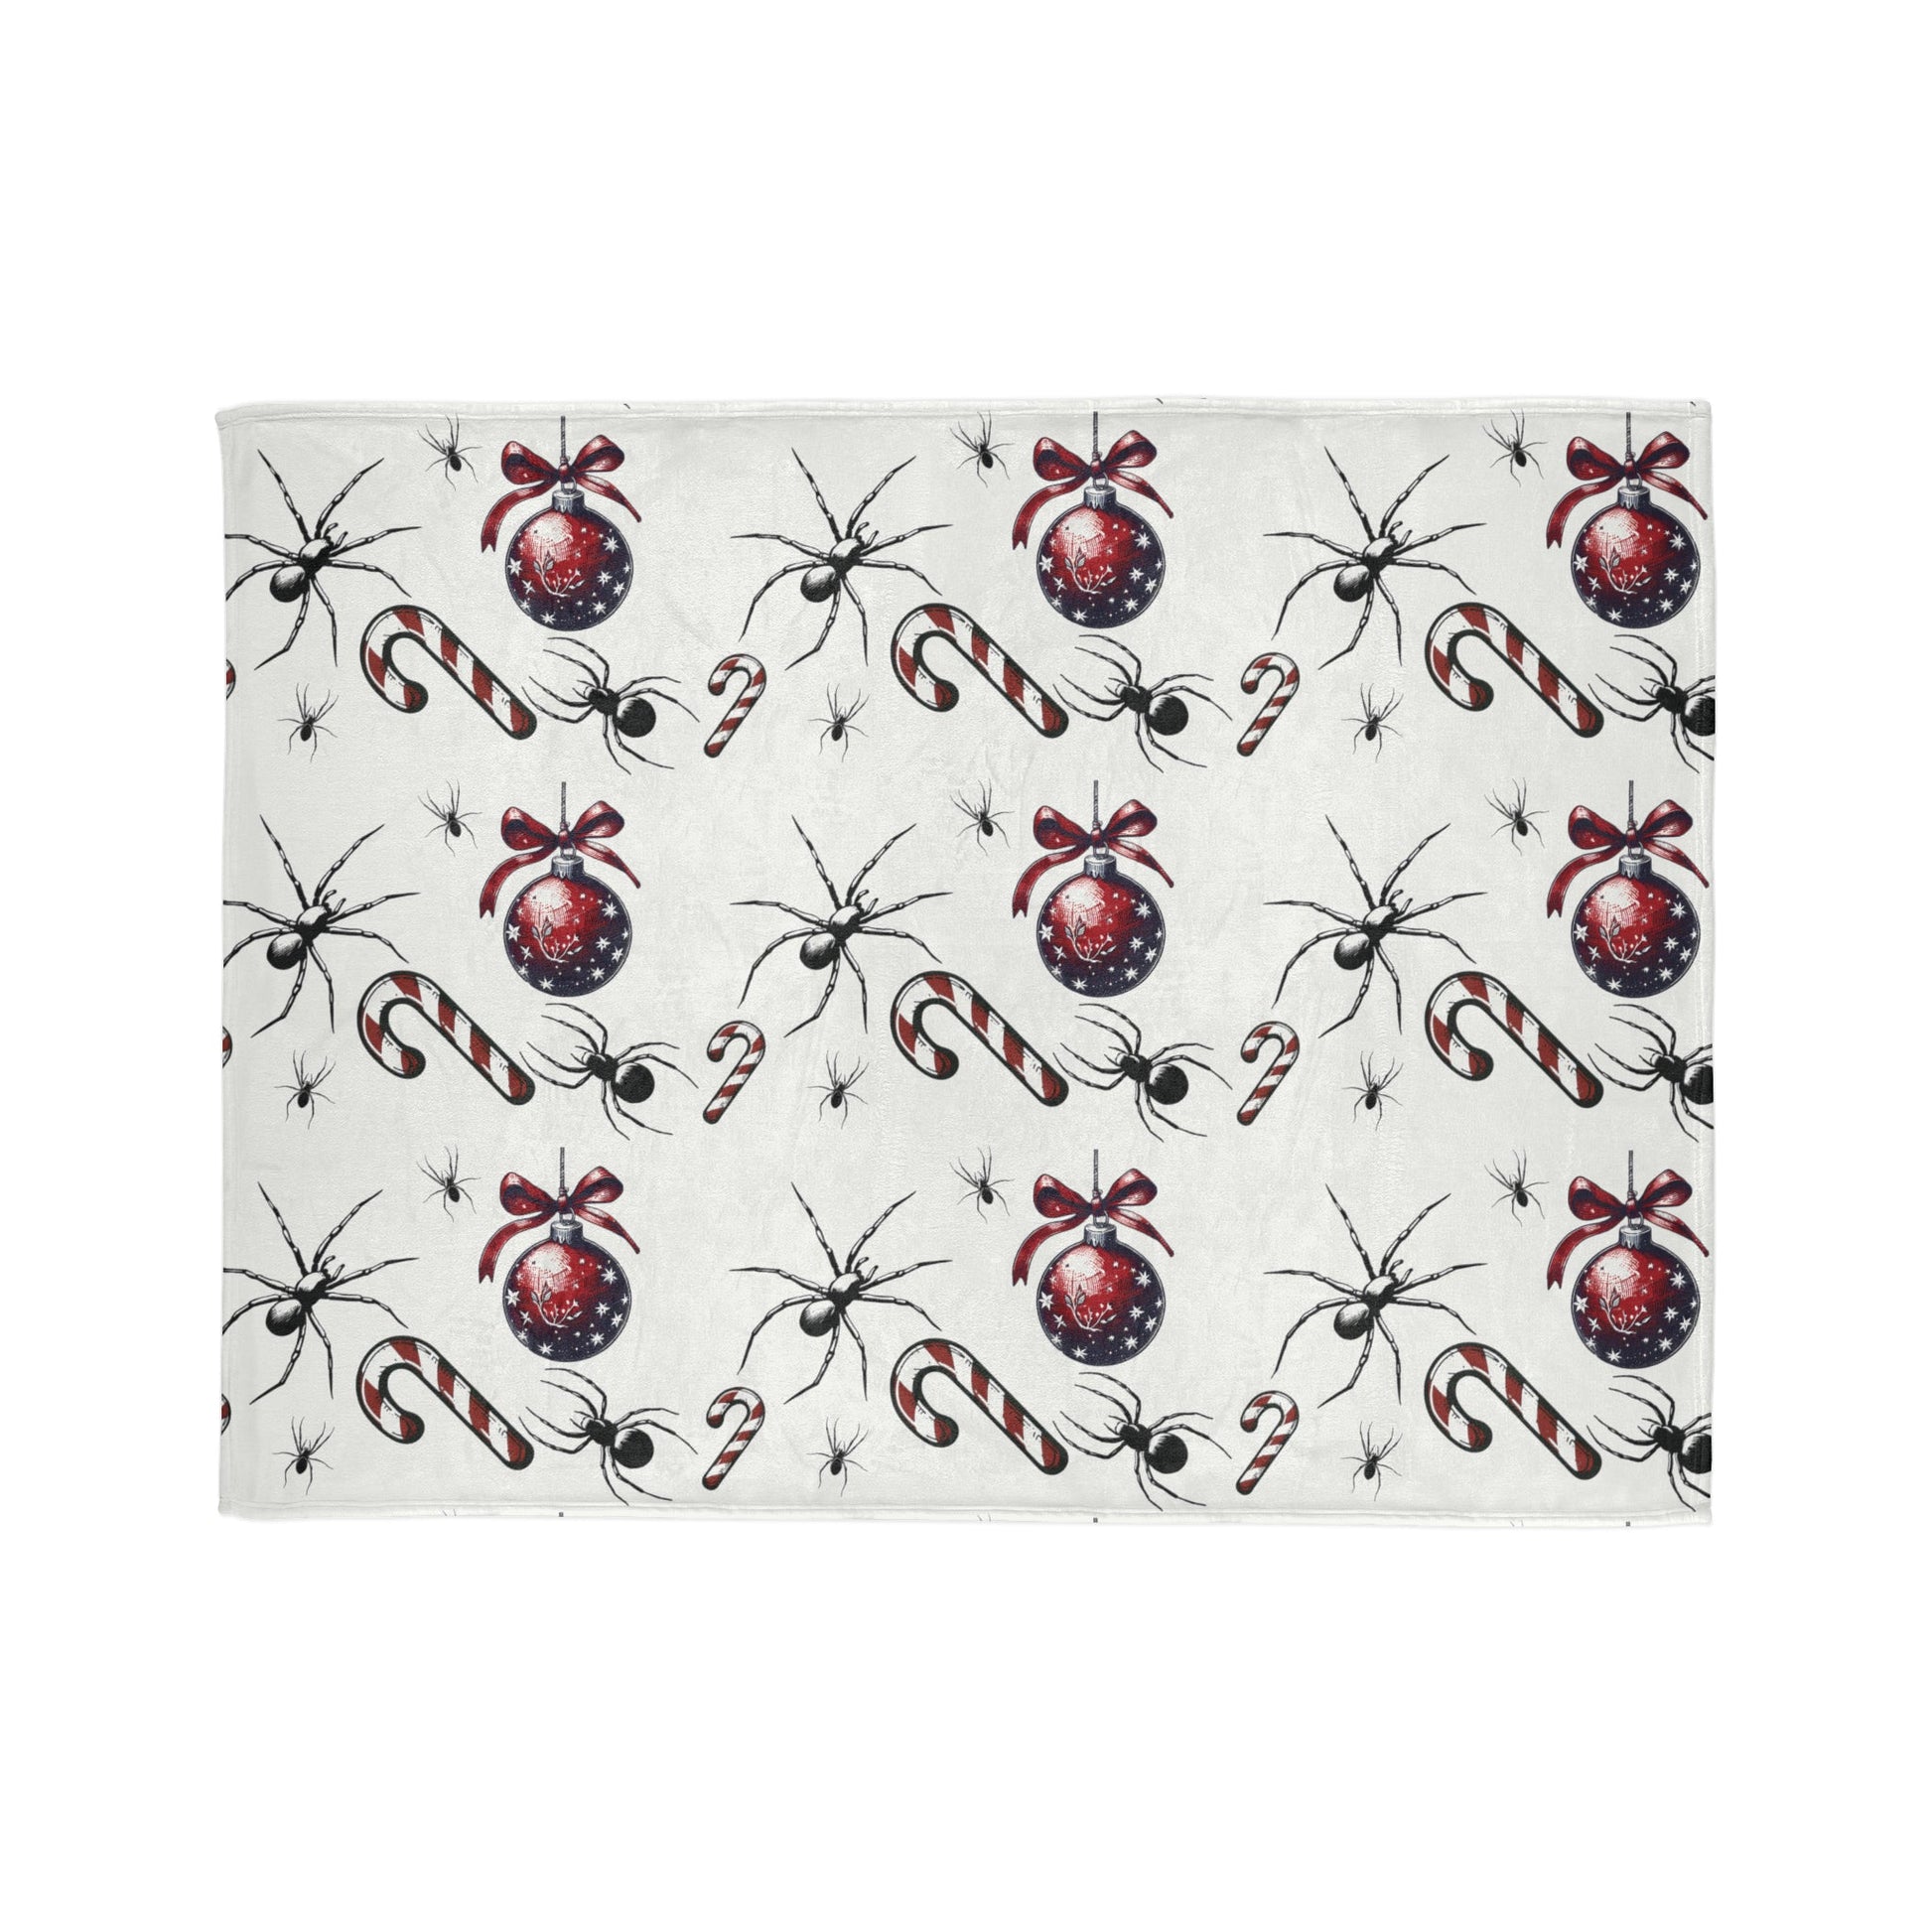 Spiders and Ornaments BlanketHome DecorVTZdesigns50" × 60"BedBeddingblanket